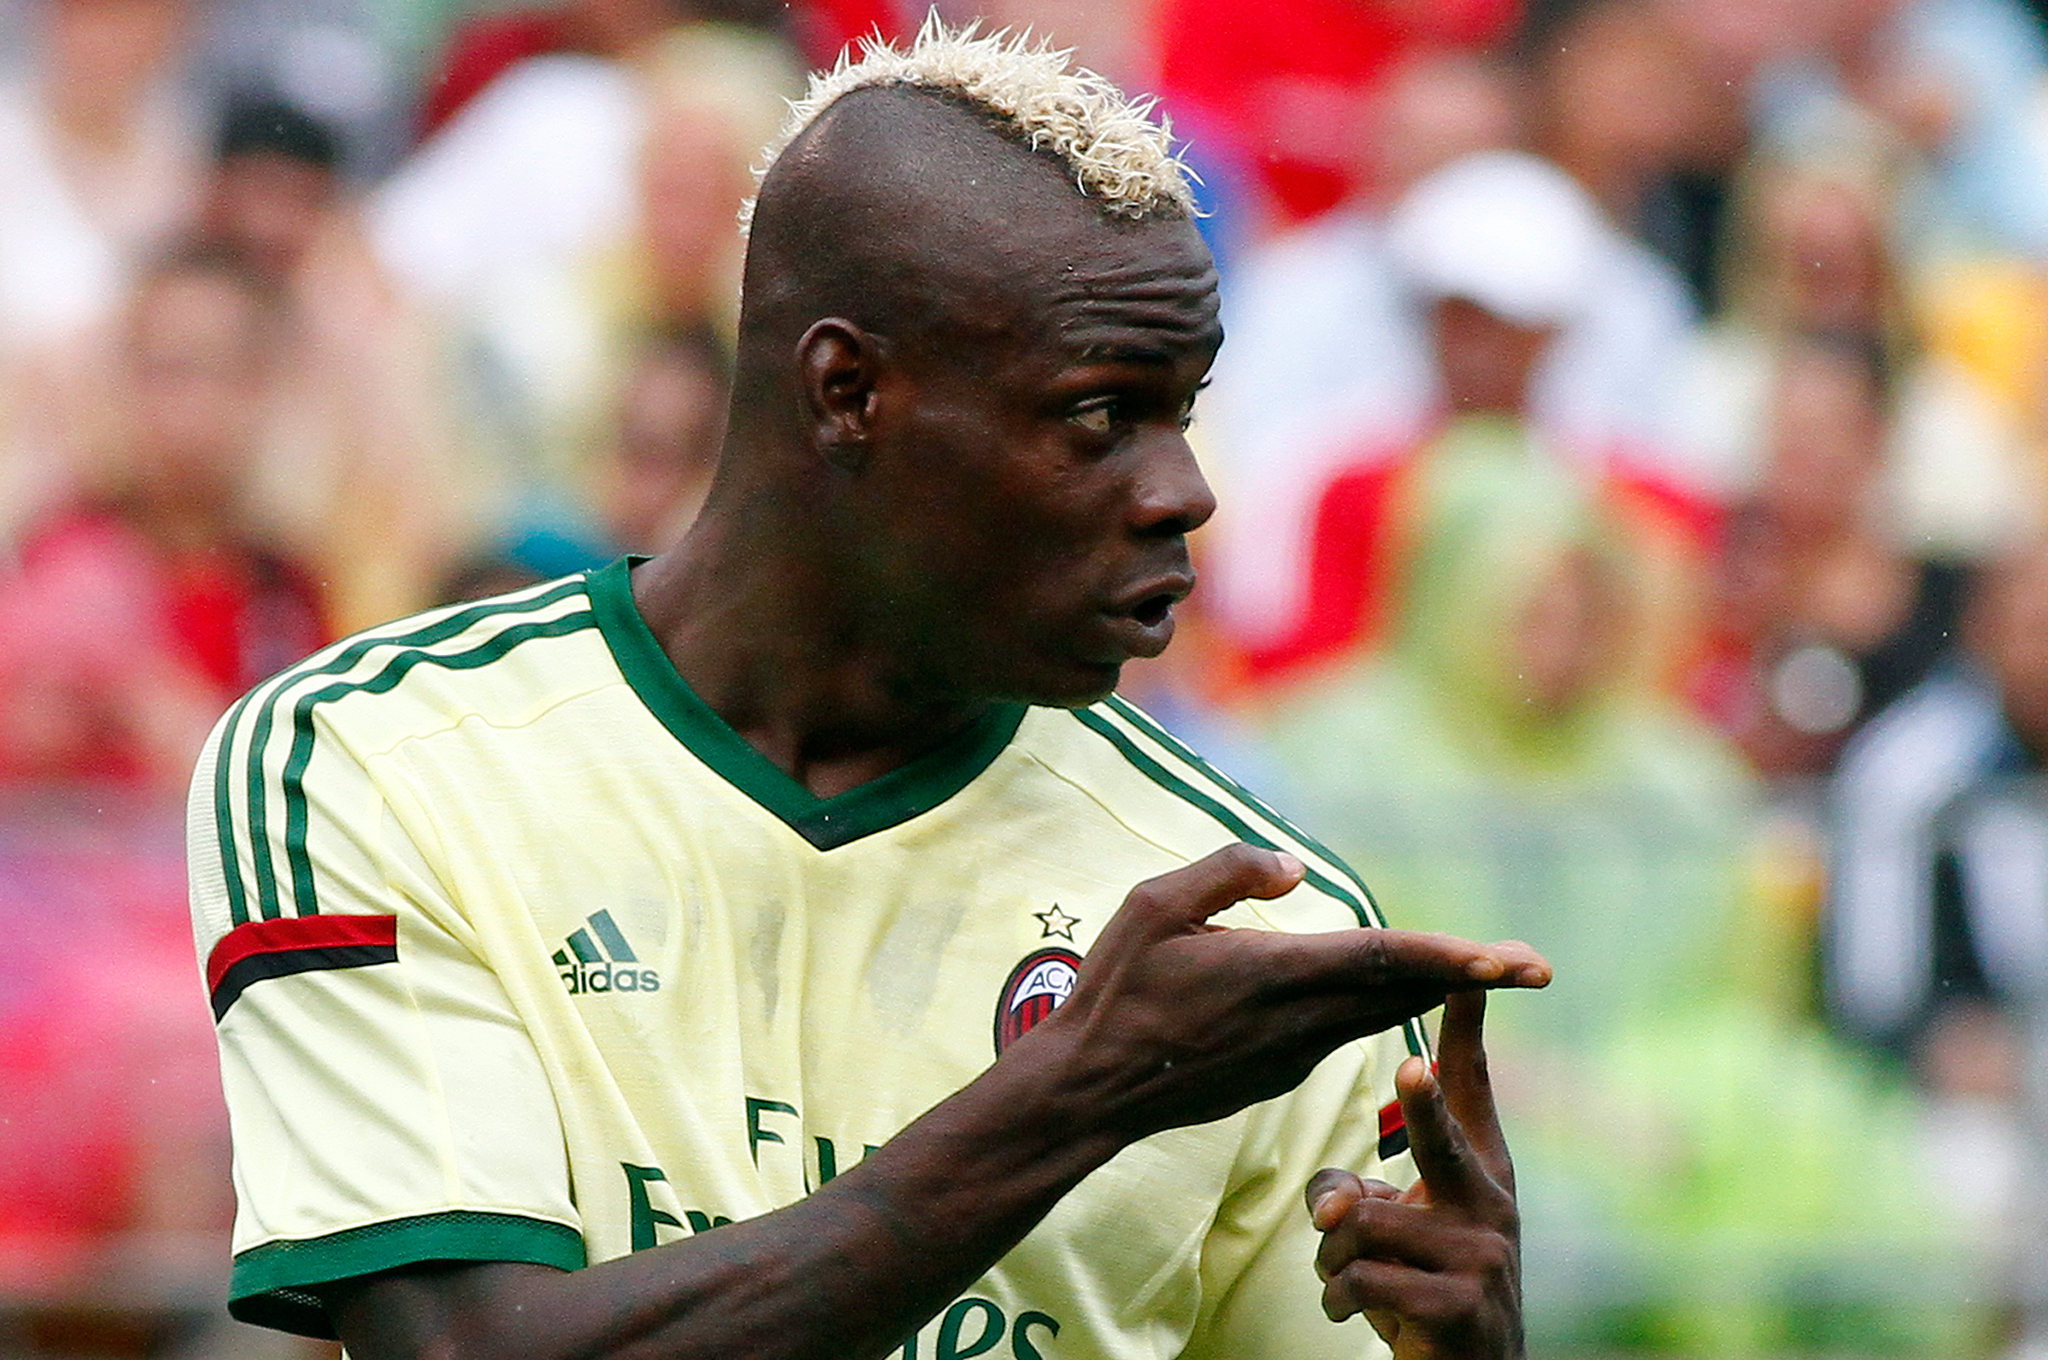 Rodgers showered praise on Balotelli last week, which led to speculation he could sign the AC Milan front man